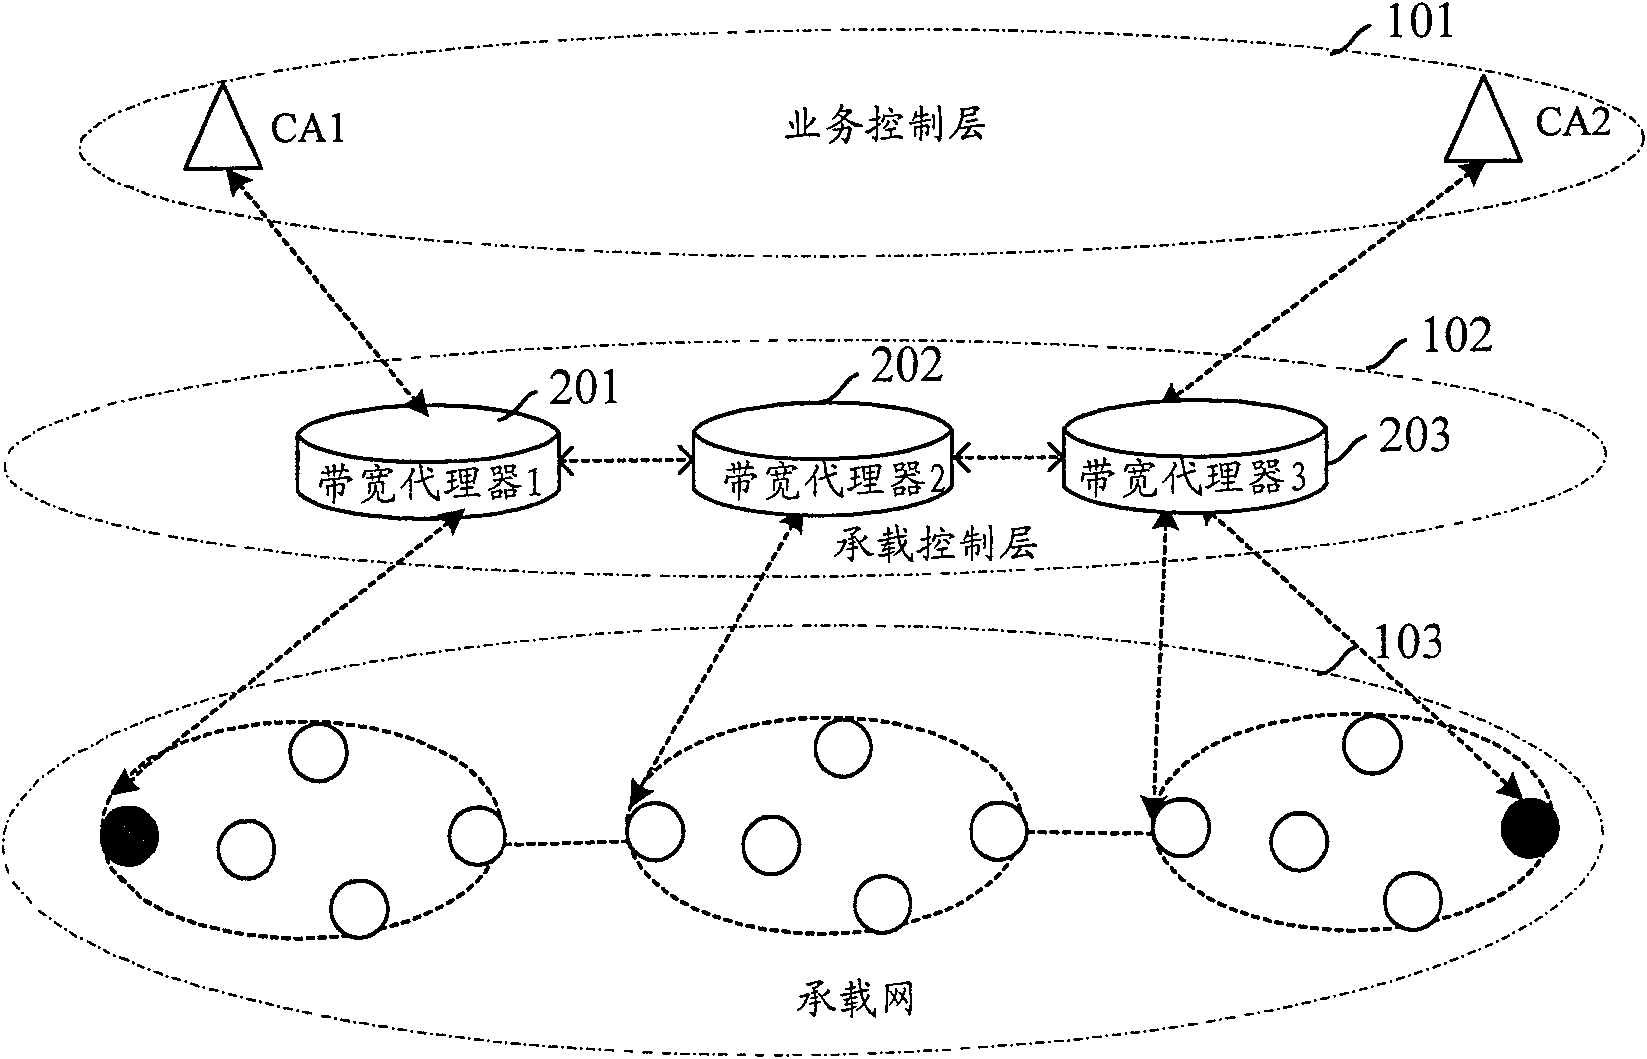 Method for configuring path route at carrying network resource supervisor